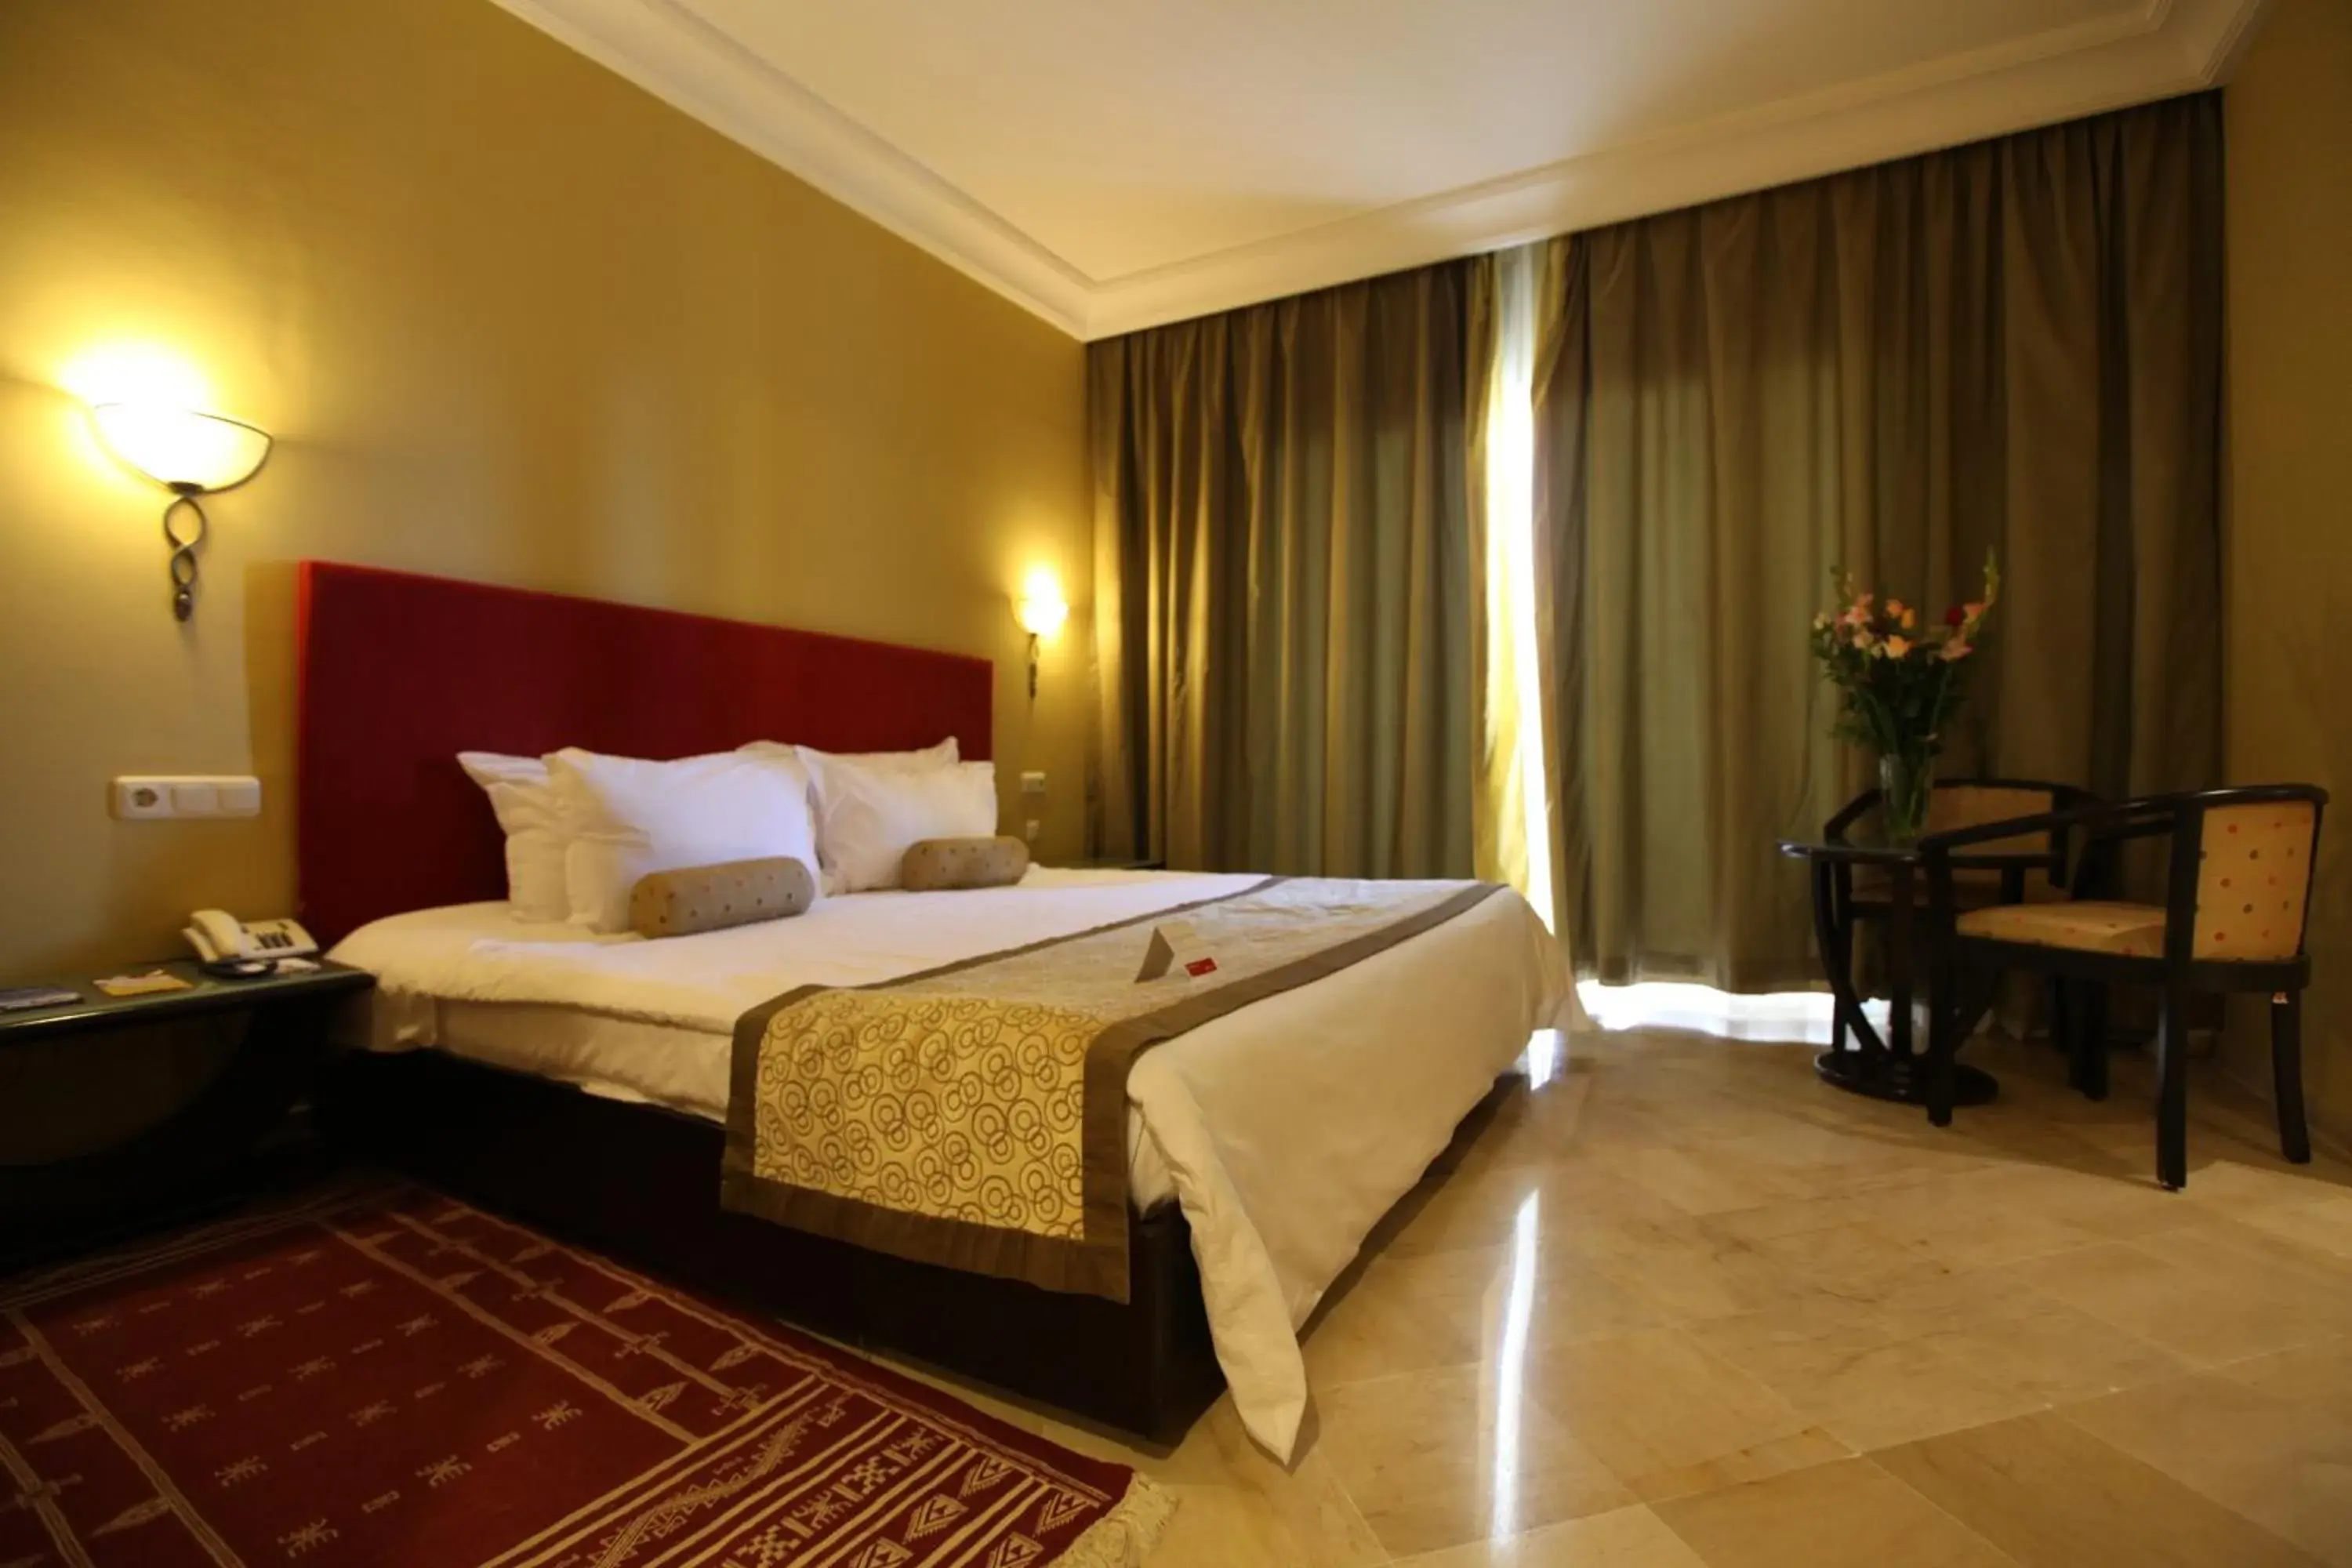 Bed, Room Photo in Ramada Plaza by Wyndham Tunis